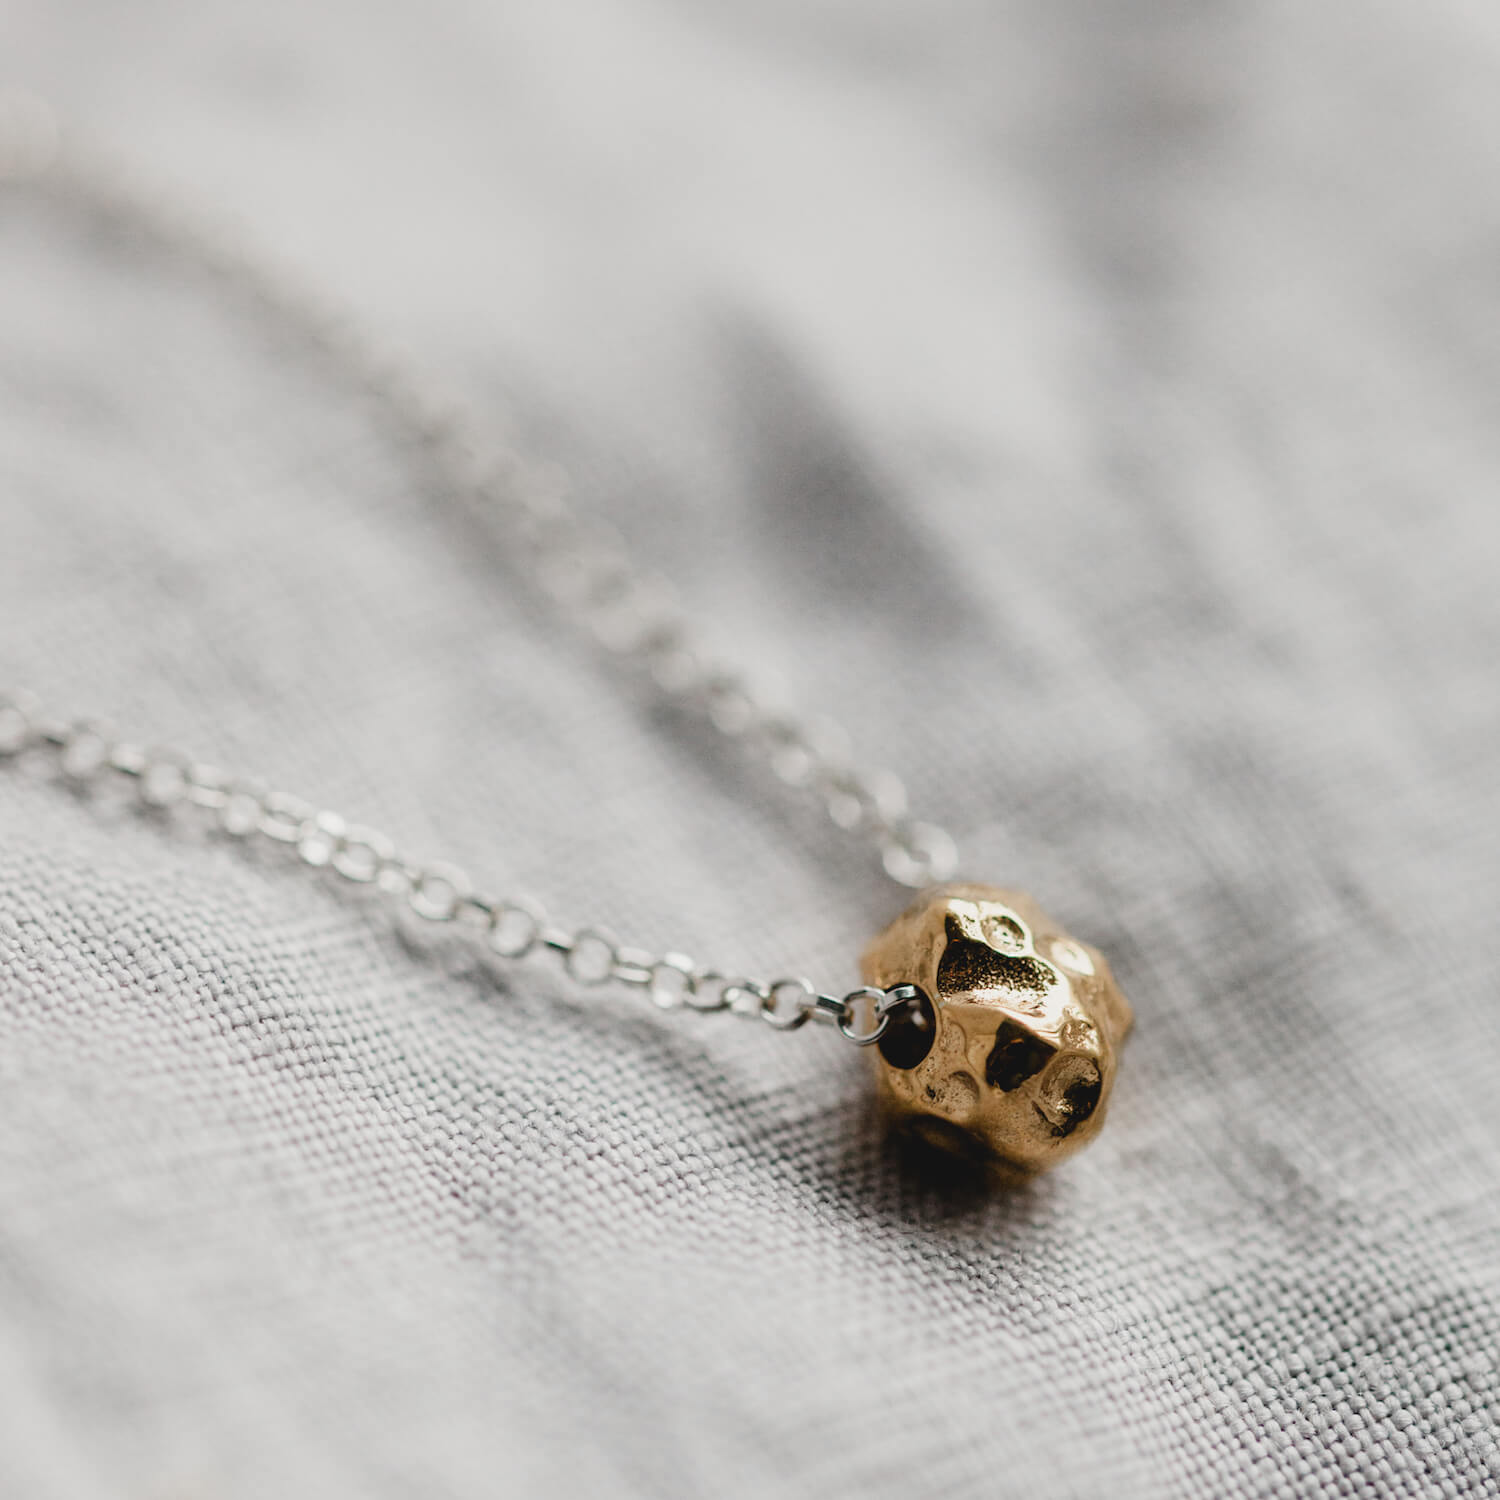 Authentic Meteorite Pendant Necklace | Jewelry by Johan - Jewelry by Johan